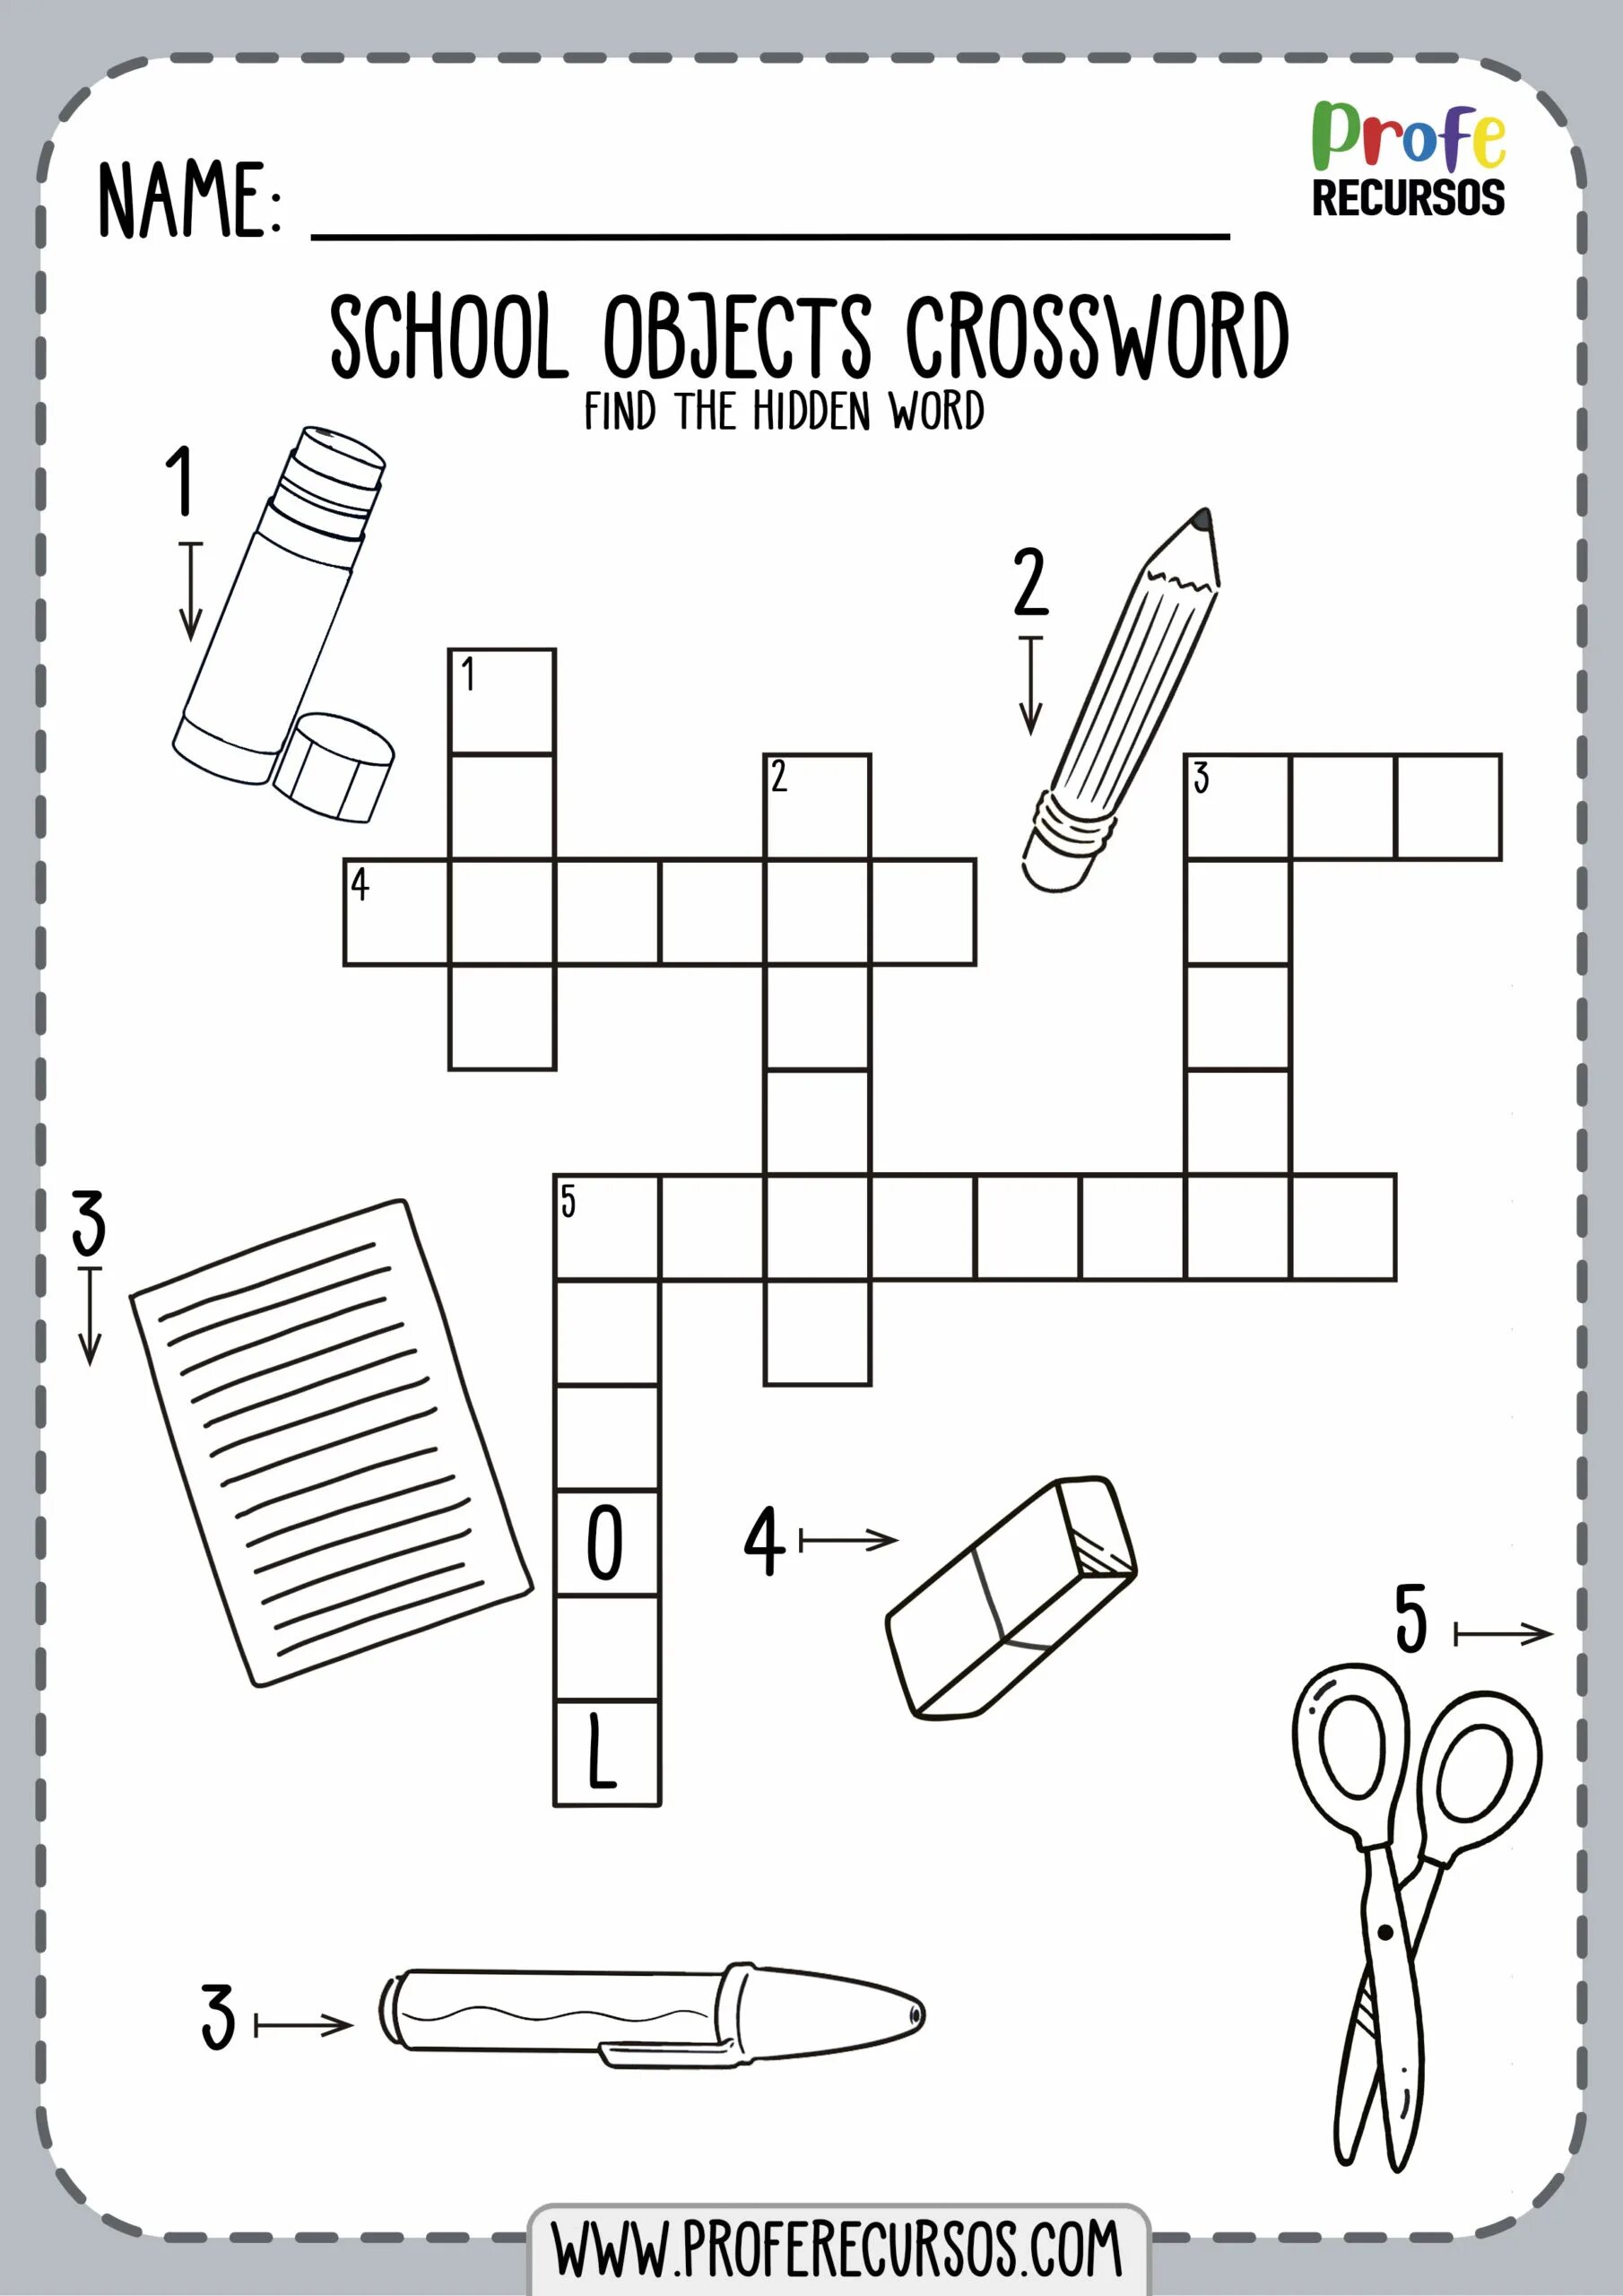 School objects crossword. School things кроссворд. School Supplies Worksheets for Kids. Classroom objects crossword. Кроссворд на английском одежда 5 класс